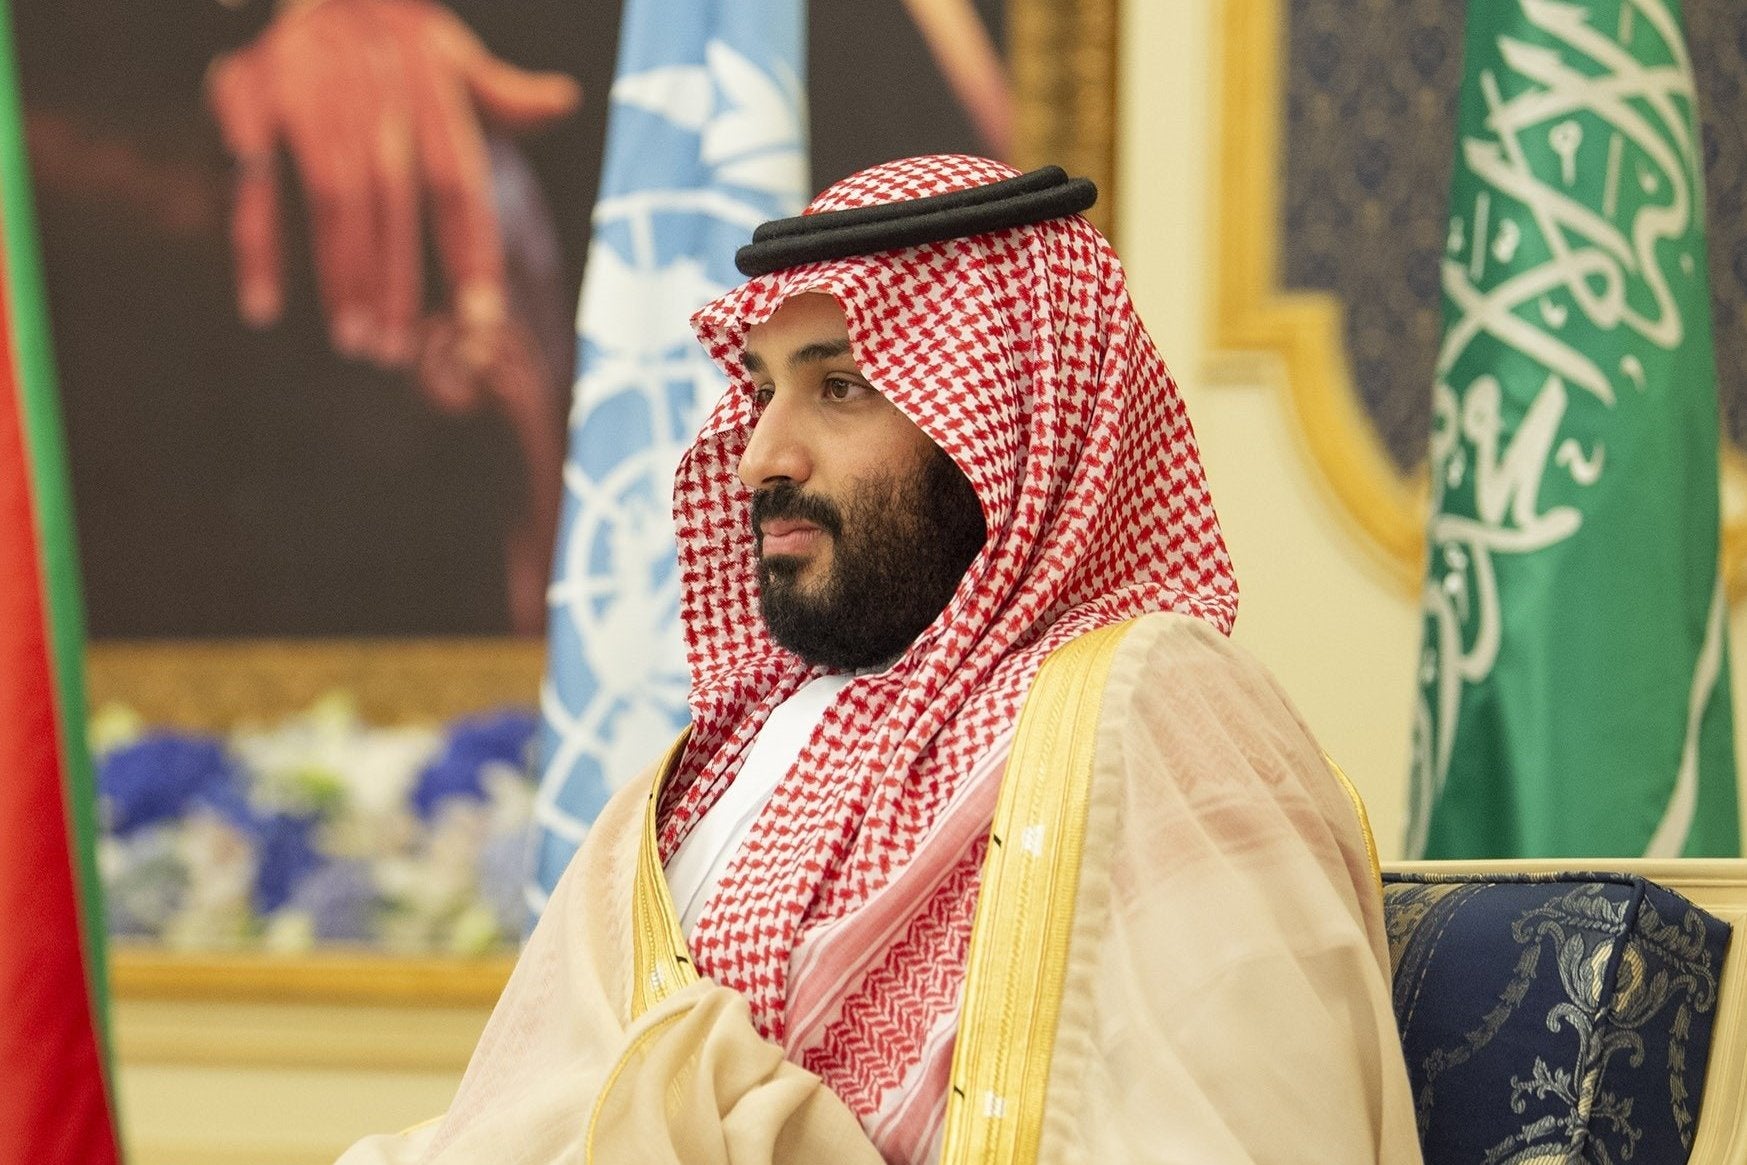 The sovereign fund is carrying out a plan to end Saidi Arabia's dependence on oil under Crown Prince Mohammed bin Salman Al Saud